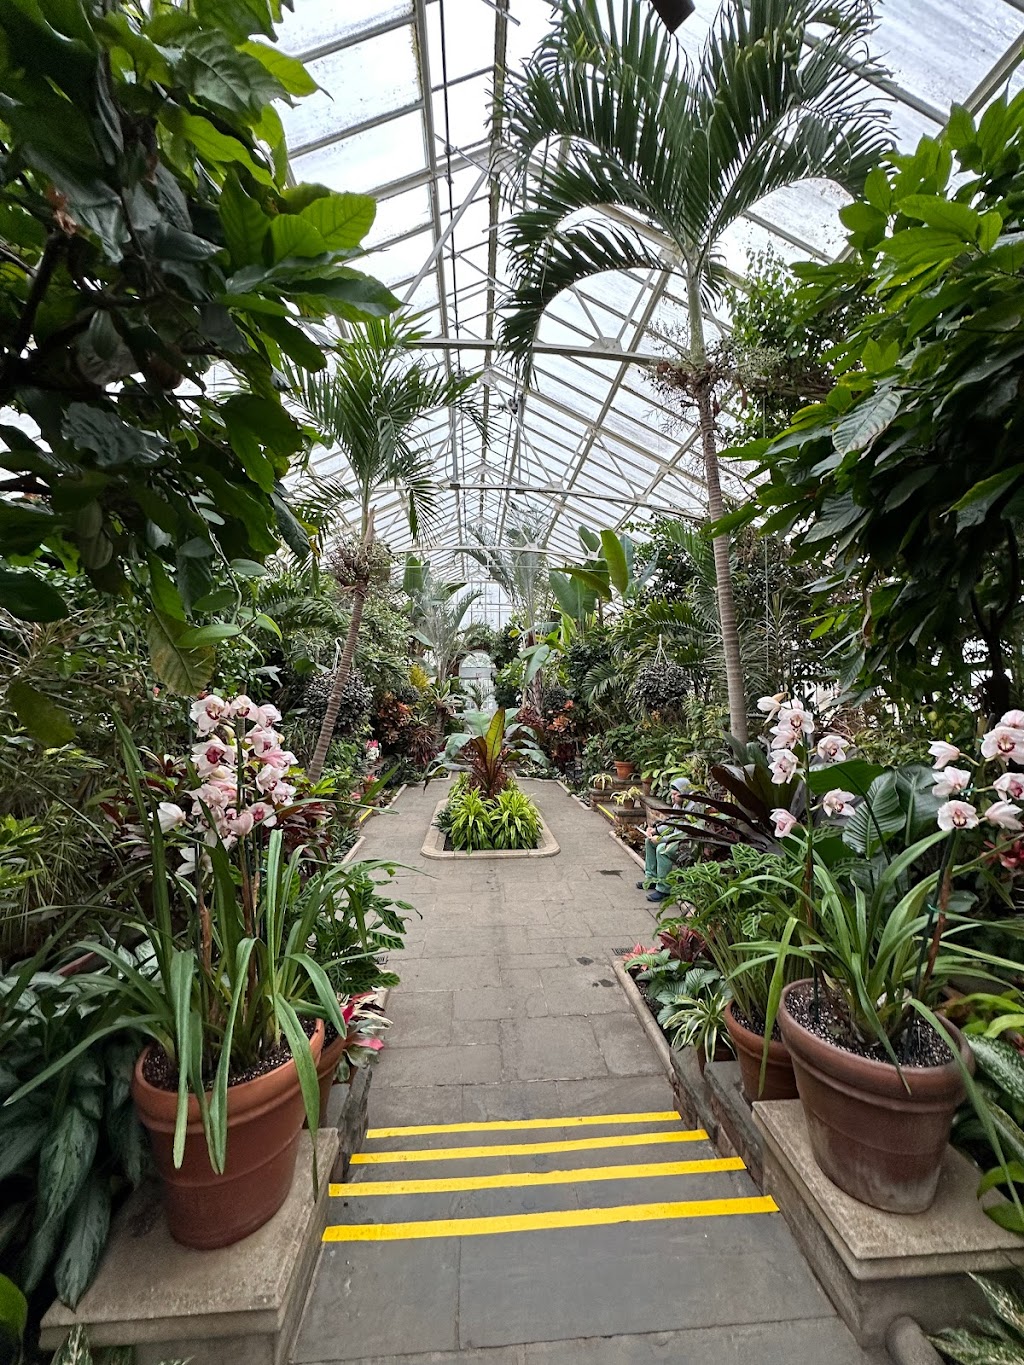 Main Greenhouse / Hibiscus House, Planting Fields Arboretum | Oyster Bay, NY 11771 | Phone: (516) 922-9200